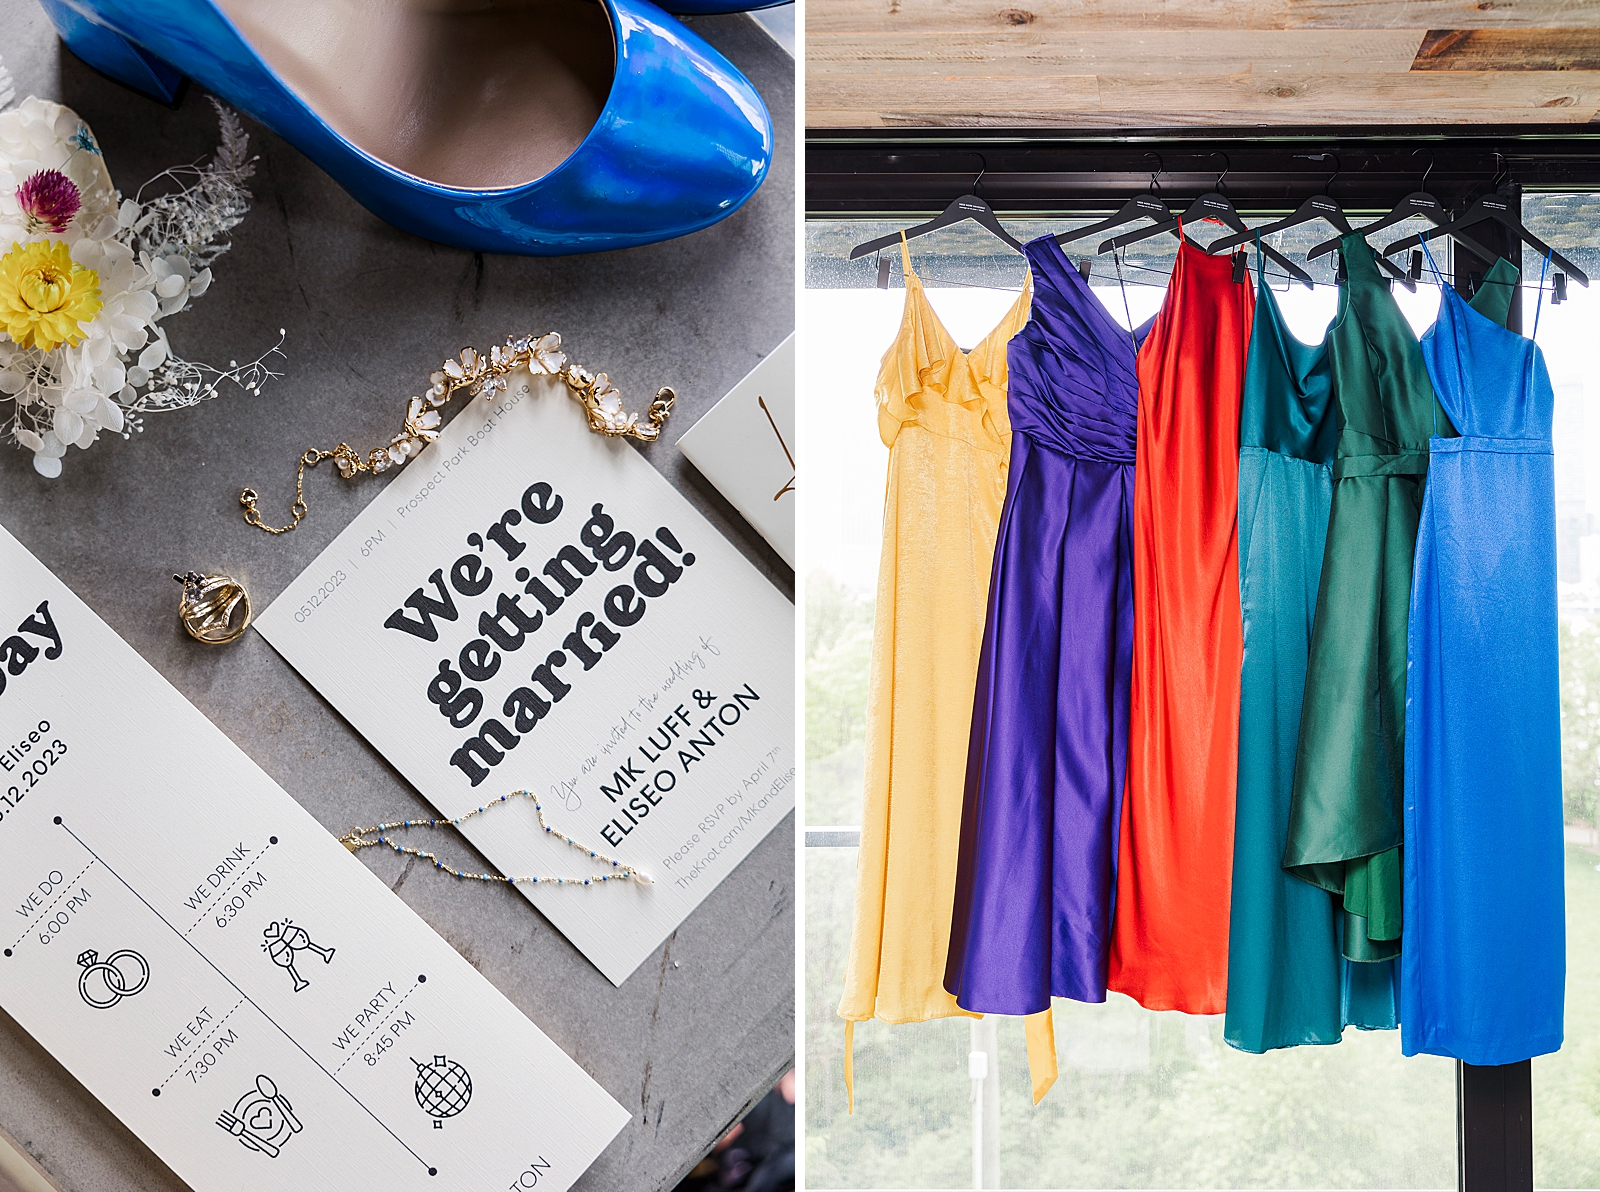 Left: Photo of wedding details including invitations, bride's jewelry, bride's shoes, and flowers. 
Right: Muilti-colored bridesmaids dresses hanging in front of a window. 